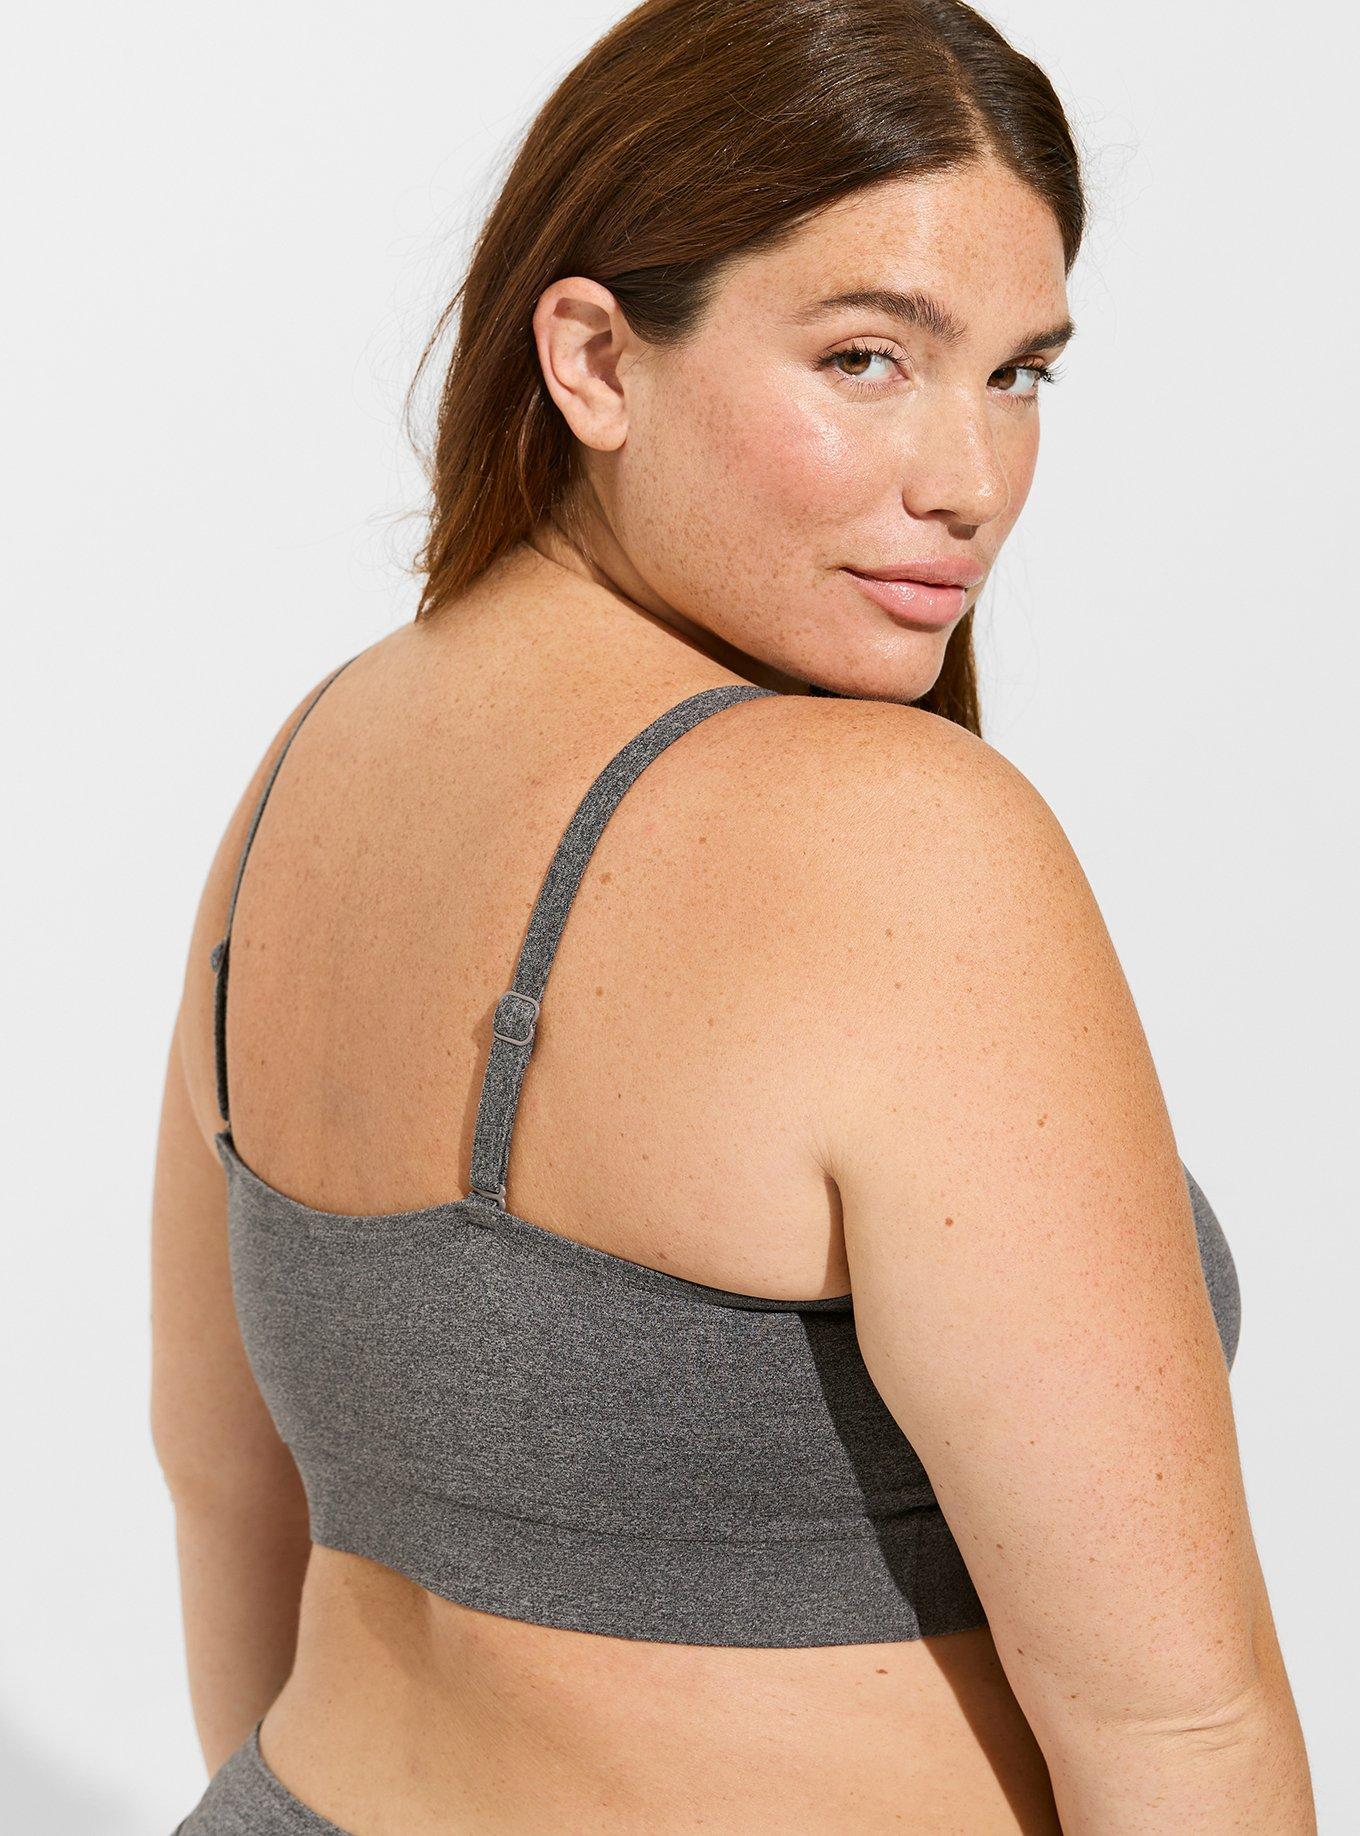 Torrid new Active size 2 lemon print sports bra crop top BC 4721 - $25 -  From Patricia